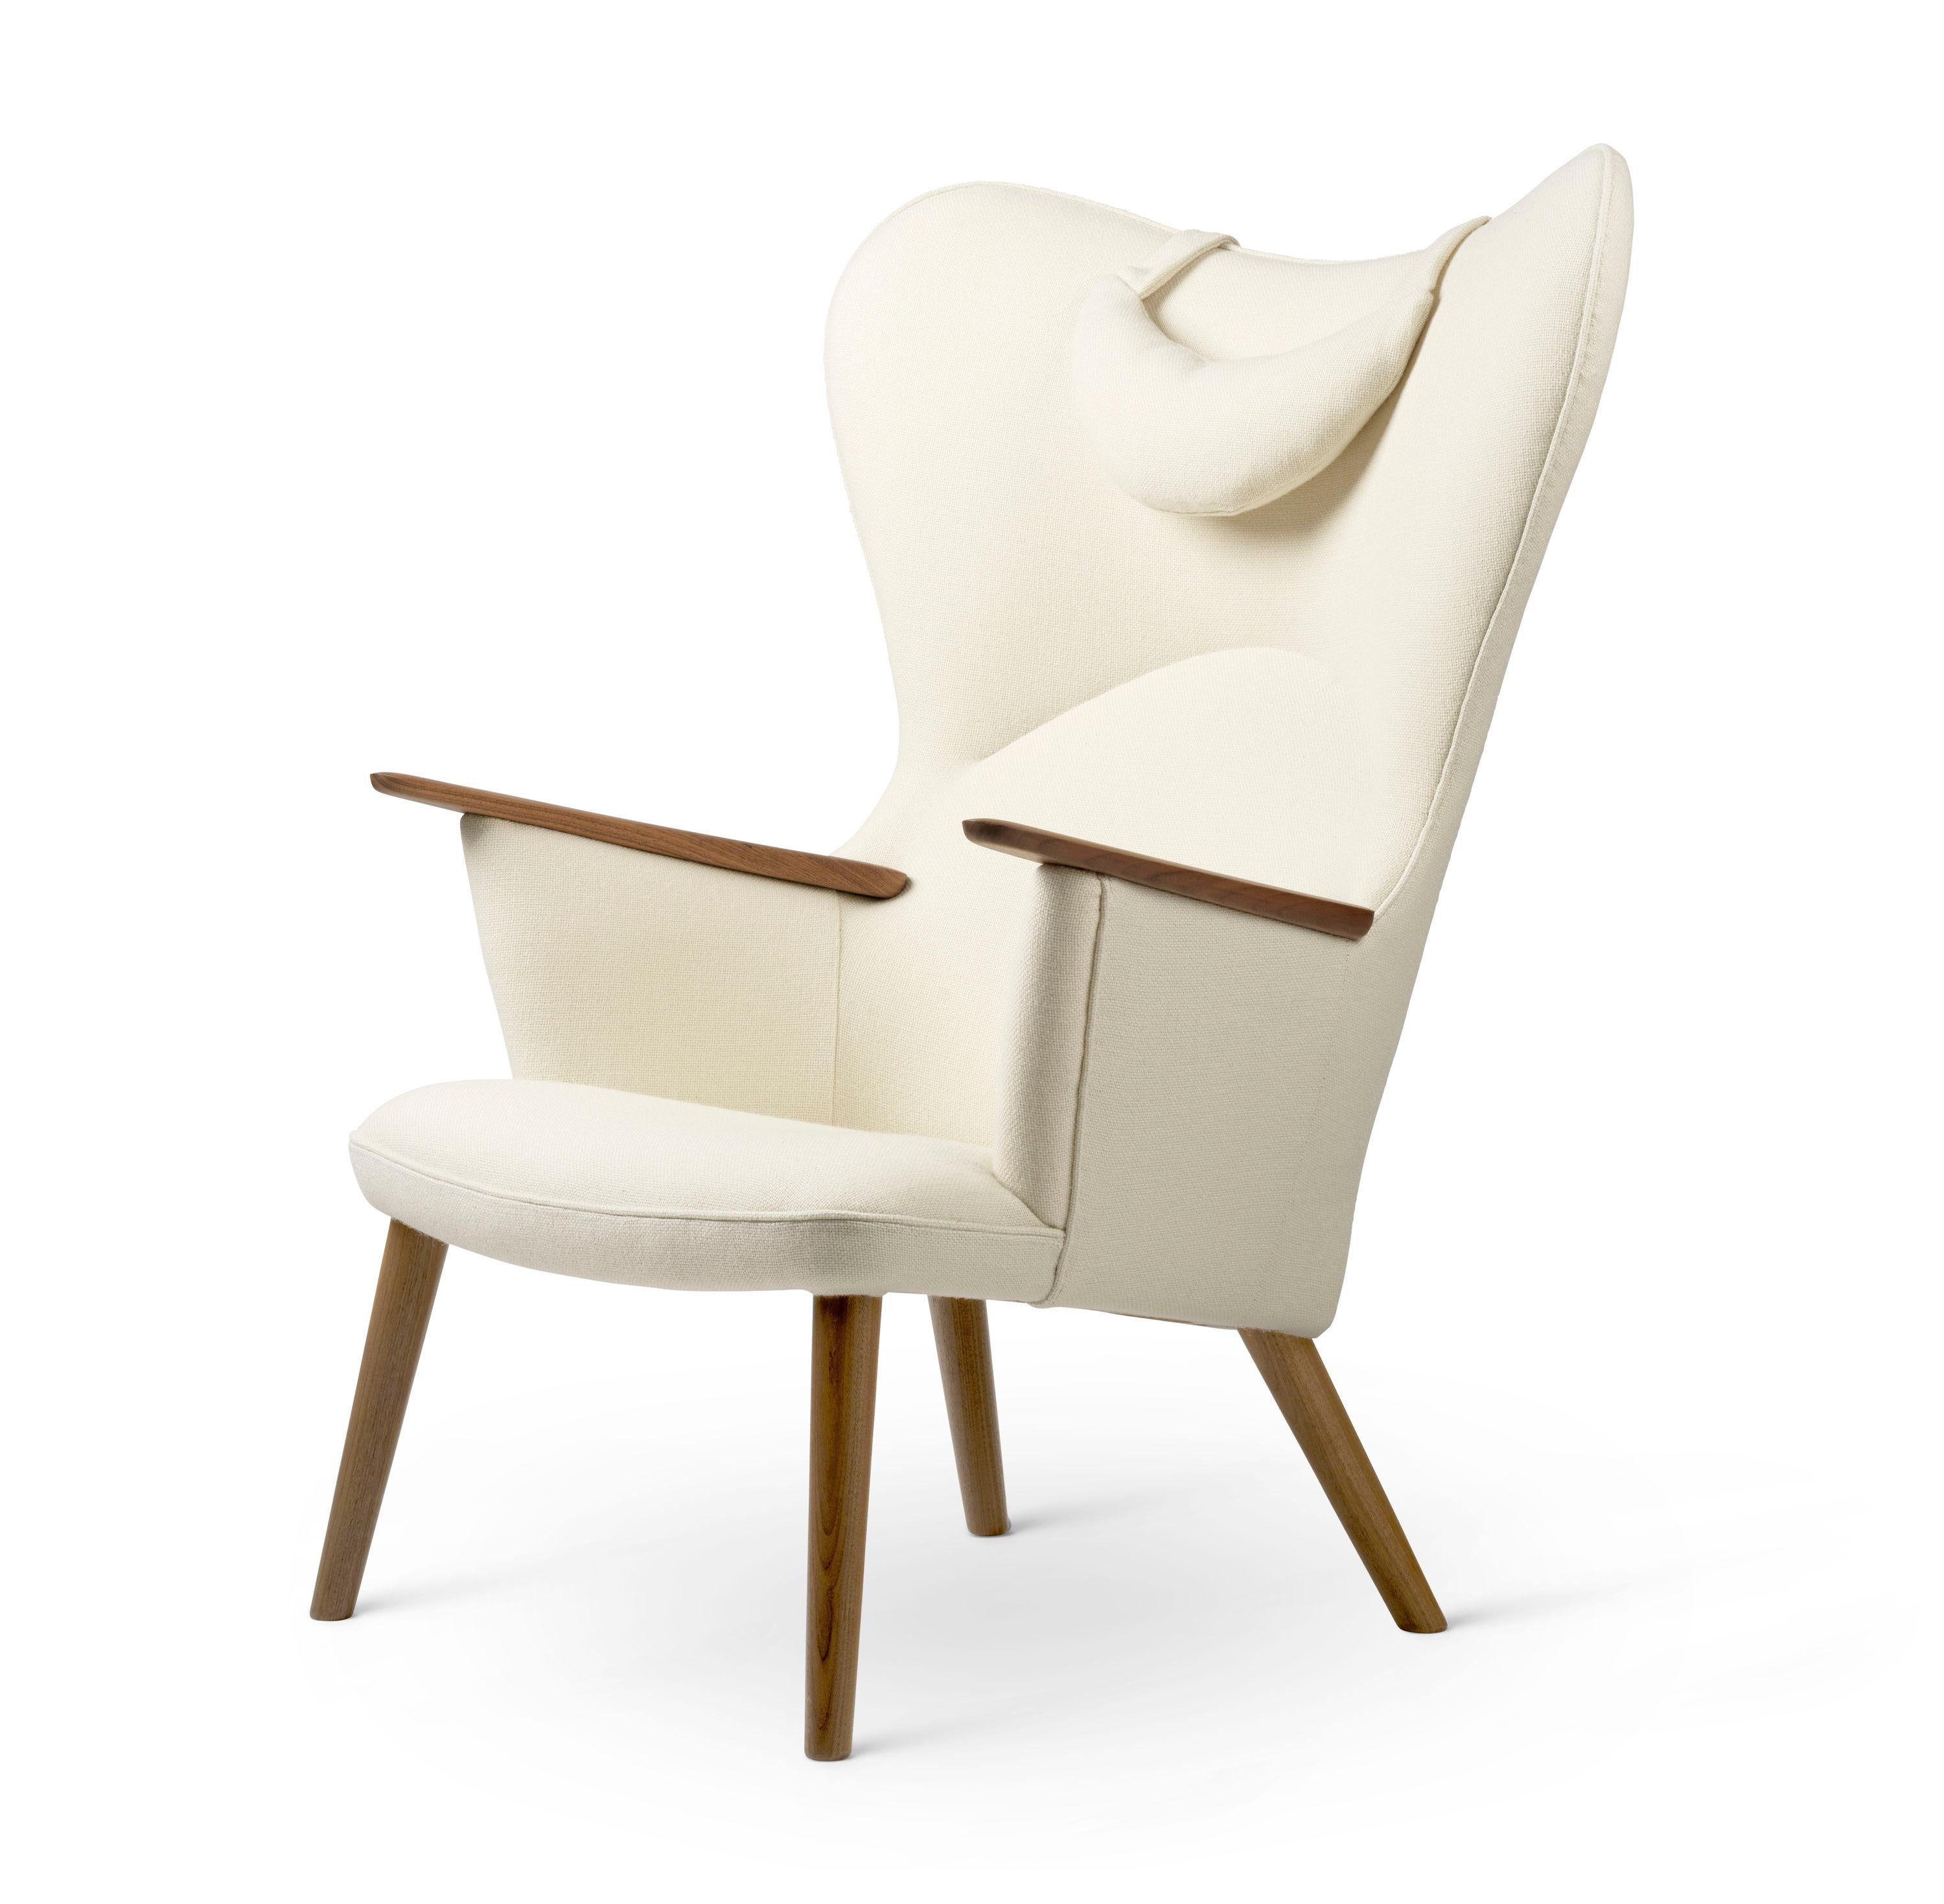 The creative and innovative mind of the legendary furniture designer Hans J. Wegner conceived the CH78 Mama Bear Chair in 1954. The iconic design is now reissued by Carl Hansen & Søn, as a tribute to the man often referred to as the master of the